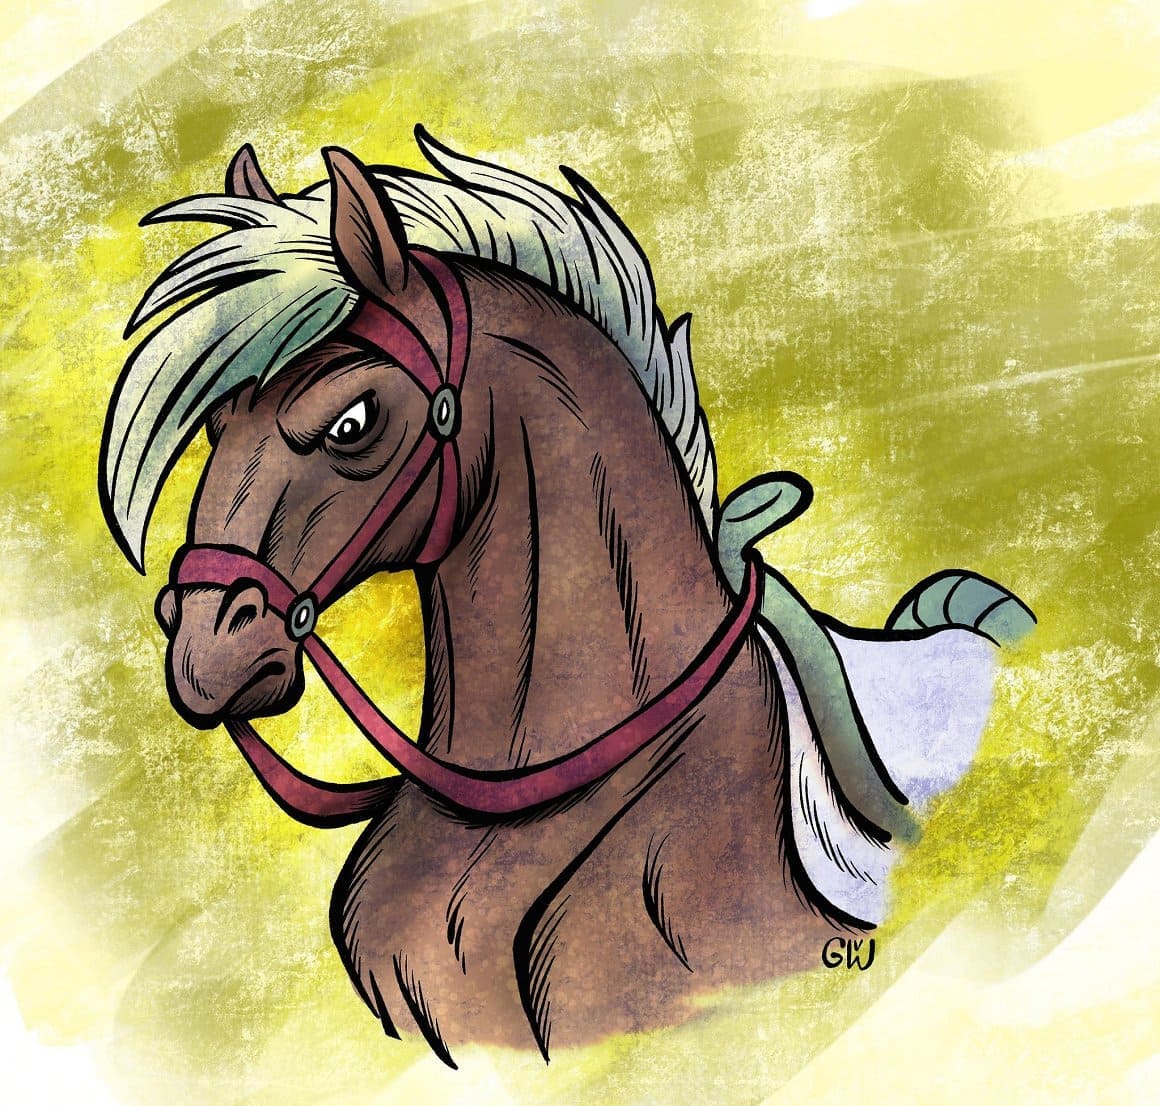 An angry horse is painted with paints on a green background.